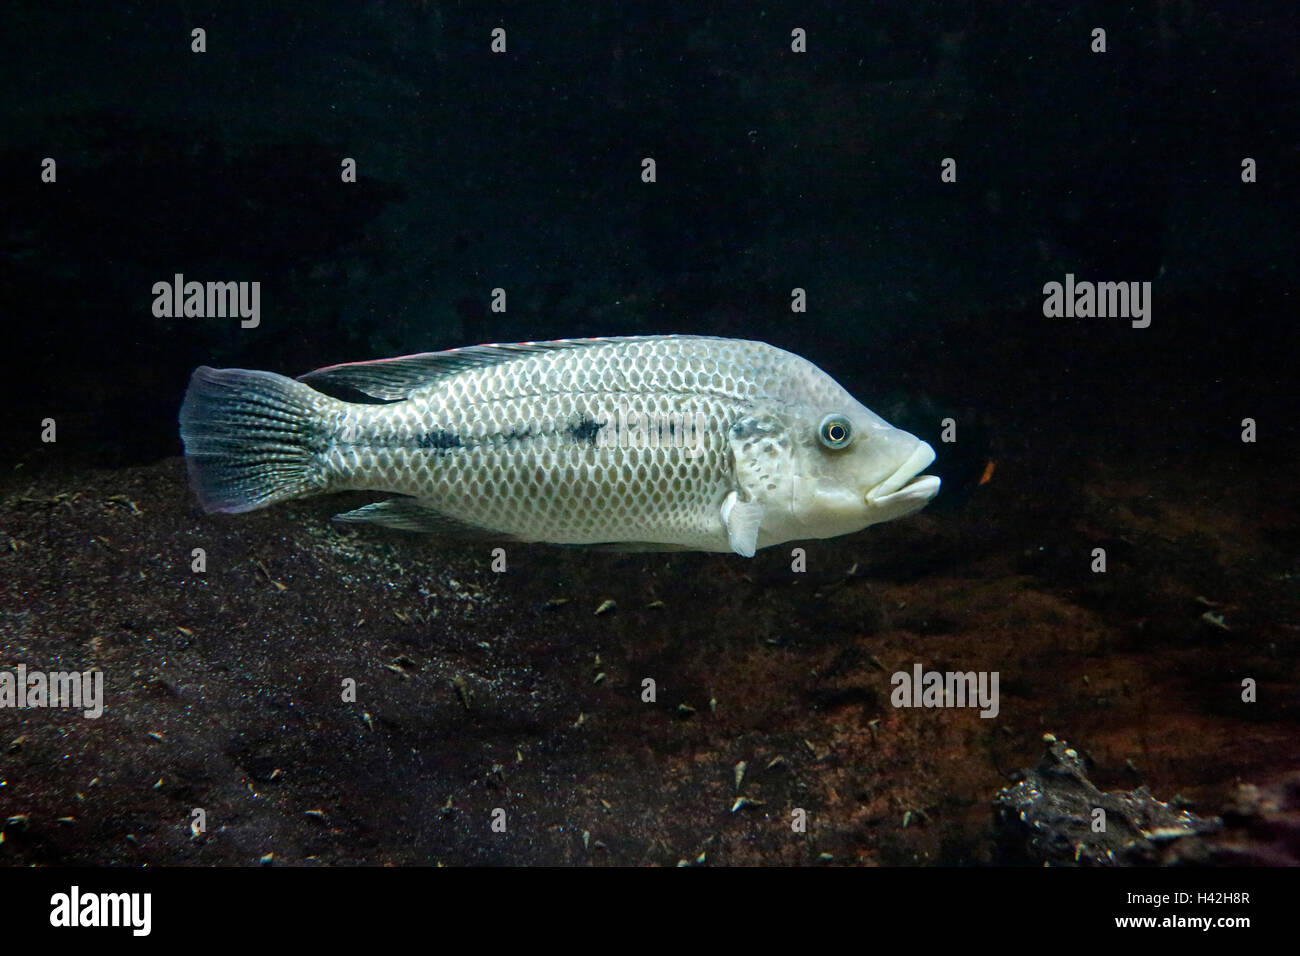 Three spotted tilapia (Oreochromis andersonii), Africa Stock Photo